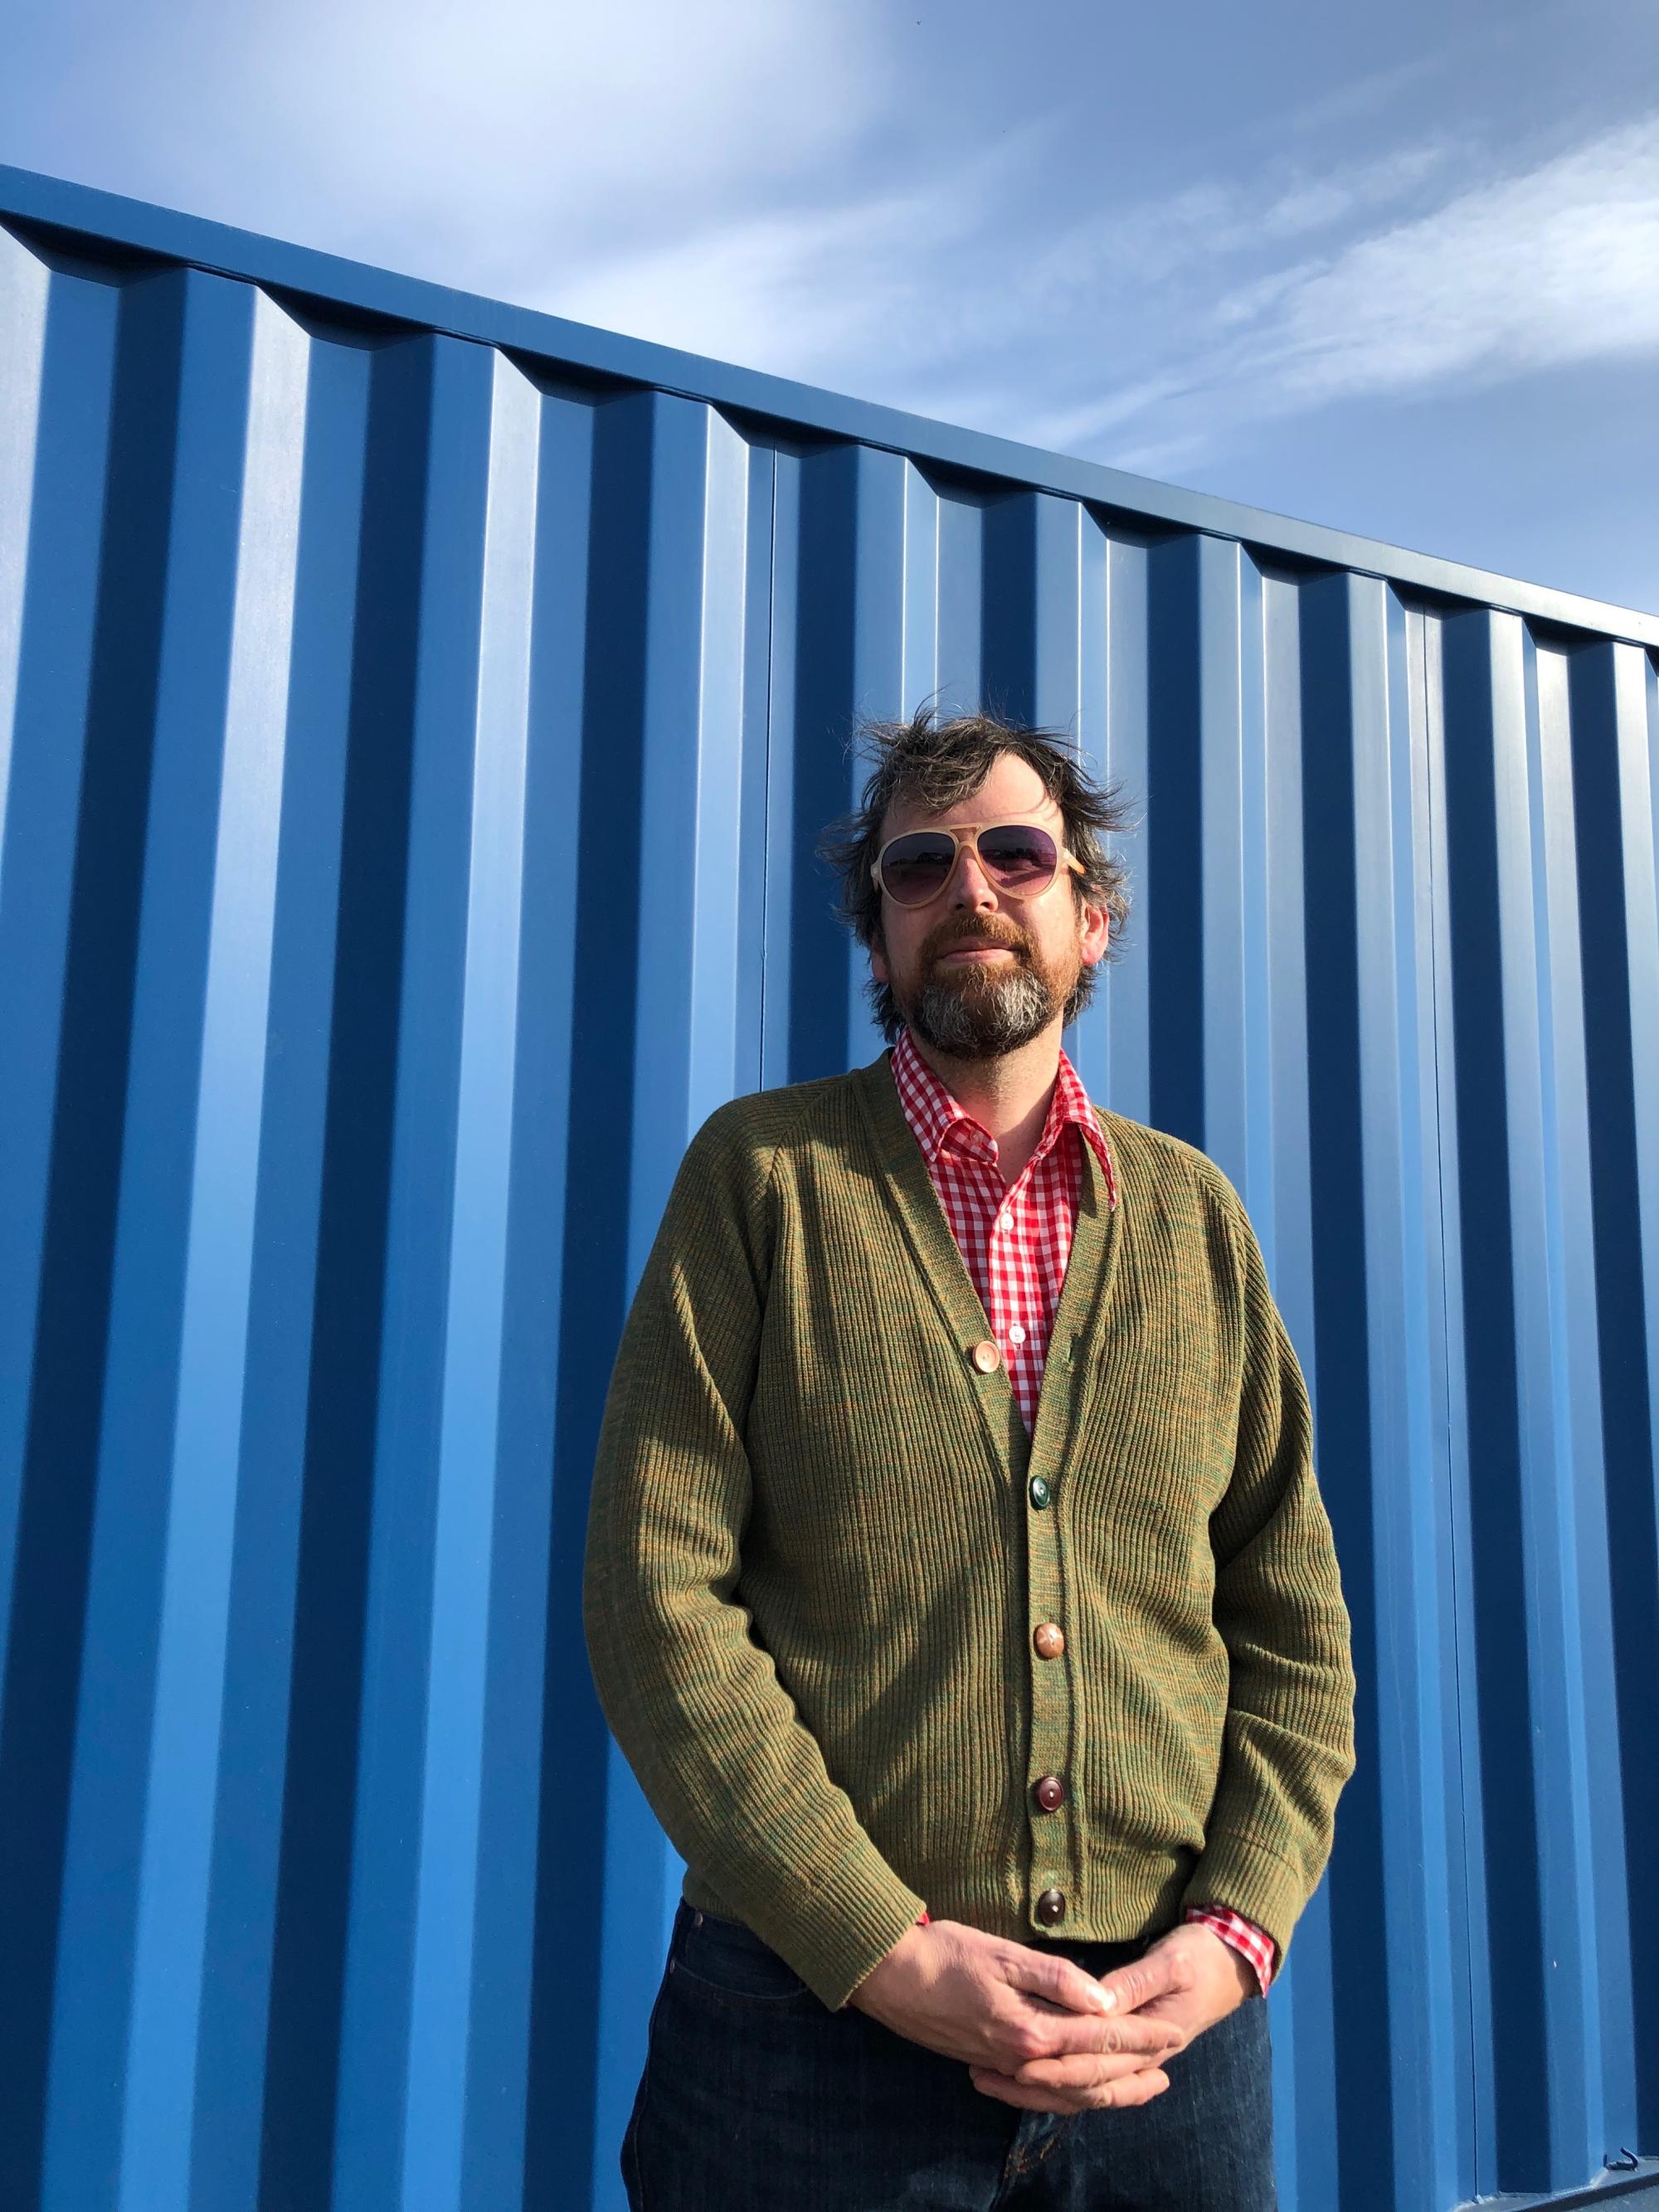 Jimmie stands in front of a blue shipping container, with light brown and gray hair and beard. He is wearing sunglasses, a red button-up, and olive green button up sweater